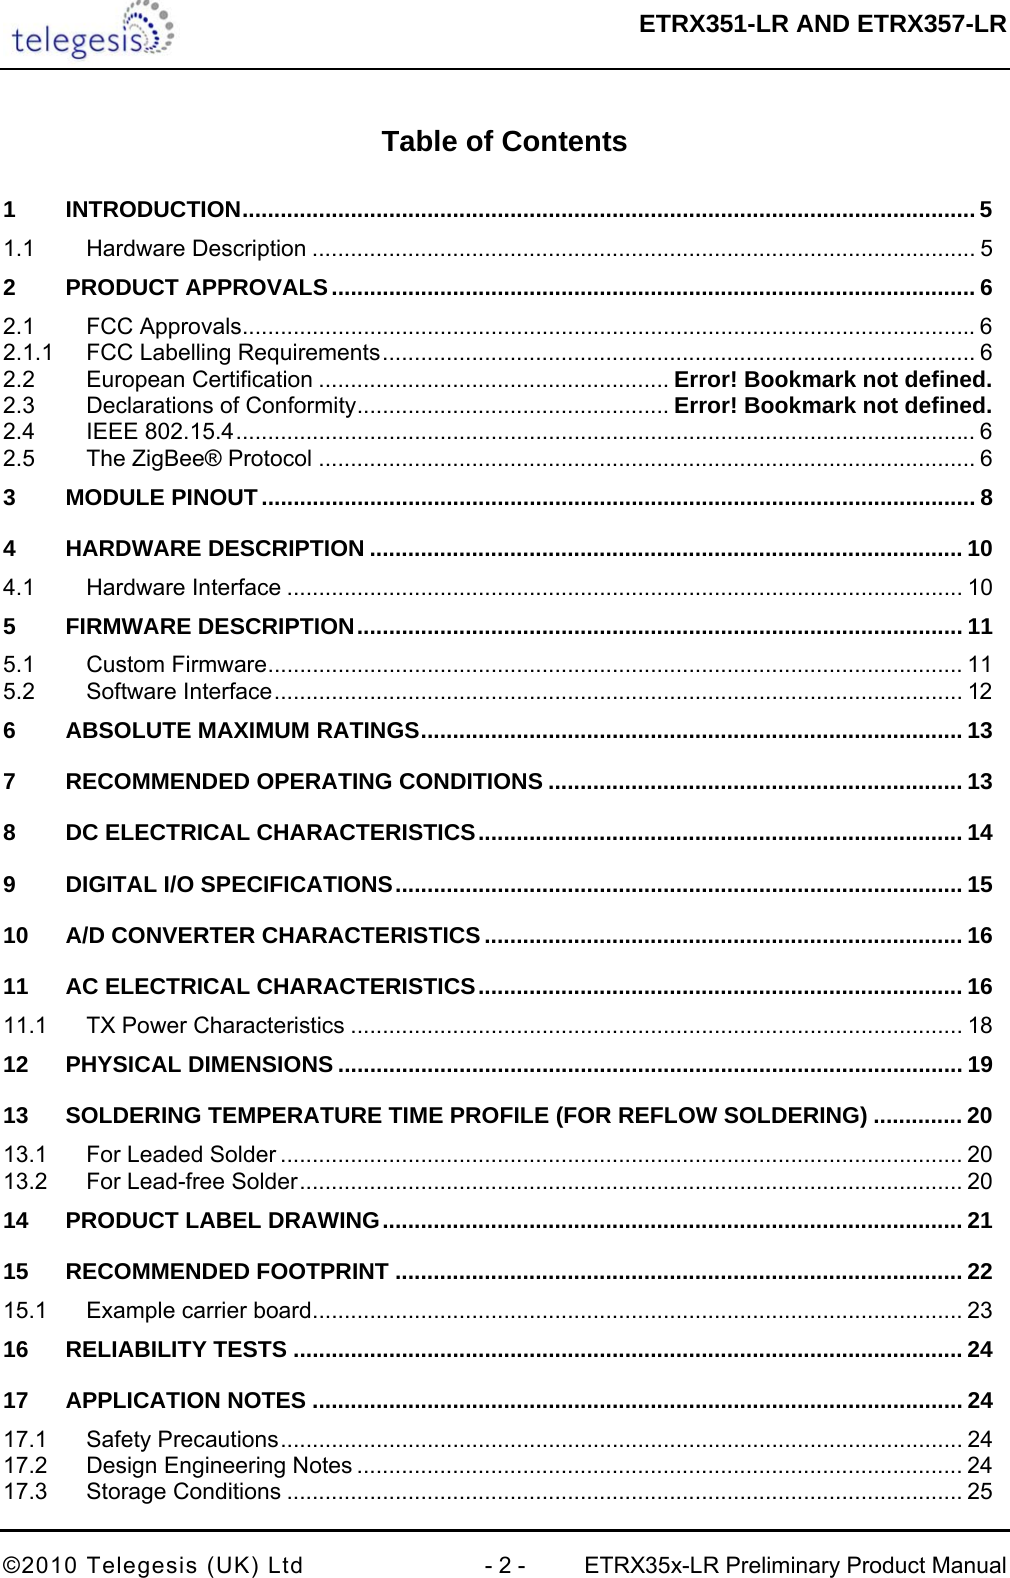  ETRX351-LR AND ETRX357-LR  ©2010 Telegesis (UK) Ltd  - 2 -  ETRX35x-LR Preliminary Product Manual  Table of Contents  1 INTRODUCTION................................................................................................................... 5 1.1 Hardware Description ........................................................................................................ 5 2 PRODUCT APPROVALS..................................................................................................... 6 2.1 FCC Approvals...................................................................................................................6 2.1.1 FCC Labelling Requirements............................................................................................. 6 2.2 European Certification ....................................................... Error! Bookmark not defined. 2.3 Declarations of Conformity................................................. Error! Bookmark not defined. 2.4 IEEE 802.15.4.................................................................................................................... 6 2.5 The ZigBee® Protocol ....................................................................................................... 6 3 MODULE PINOUT................................................................................................................ 8 4 HARDWARE DESCRIPTION ............................................................................................. 10 4.1 Hardware Interface .......................................................................................................... 10 5 FIRMWARE DESCRIPTION............................................................................................... 11 5.1 Custom Firmware............................................................................................................. 11 5.2 Software Interface............................................................................................................ 12 6 ABSOLUTE MAXIMUM RATINGS..................................................................................... 13 7 RECOMMENDED OPERATING CONDITIONS ................................................................. 13 8 DC ELECTRICAL CHARACTERISTICS............................................................................ 14 9 DIGITAL I/O SPECIFICATIONS......................................................................................... 15 10 A/D CONVERTER CHARACTERISTICS ........................................................................... 16 11 AC ELECTRICAL CHARACTERISTICS............................................................................ 16 11.1 TX Power Characteristics ................................................................................................ 18 12 PHYSICAL DIMENSIONS .................................................................................................. 19 13 SOLDERING TEMPERATURE TIME PROFILE (FOR REFLOW SOLDERING) .............. 20 13.1 For Leaded Solder ........................................................................................................... 20 13.2 For Lead-free Solder........................................................................................................ 20 14 PRODUCT LABEL DRAWING........................................................................................... 21 15 RECOMMENDED FOOTPRINT ......................................................................................... 22 15.1 Example carrier board...................................................................................................... 23 16 RELIABILITY TESTS ......................................................................................................... 24 17 APPLICATION NOTES ...................................................................................................... 24 17.1 Safety Precautions........................................................................................................... 24 17.2 Design Engineering Notes ............................................................................................... 24 17.3 Storage Conditions .......................................................................................................... 25 